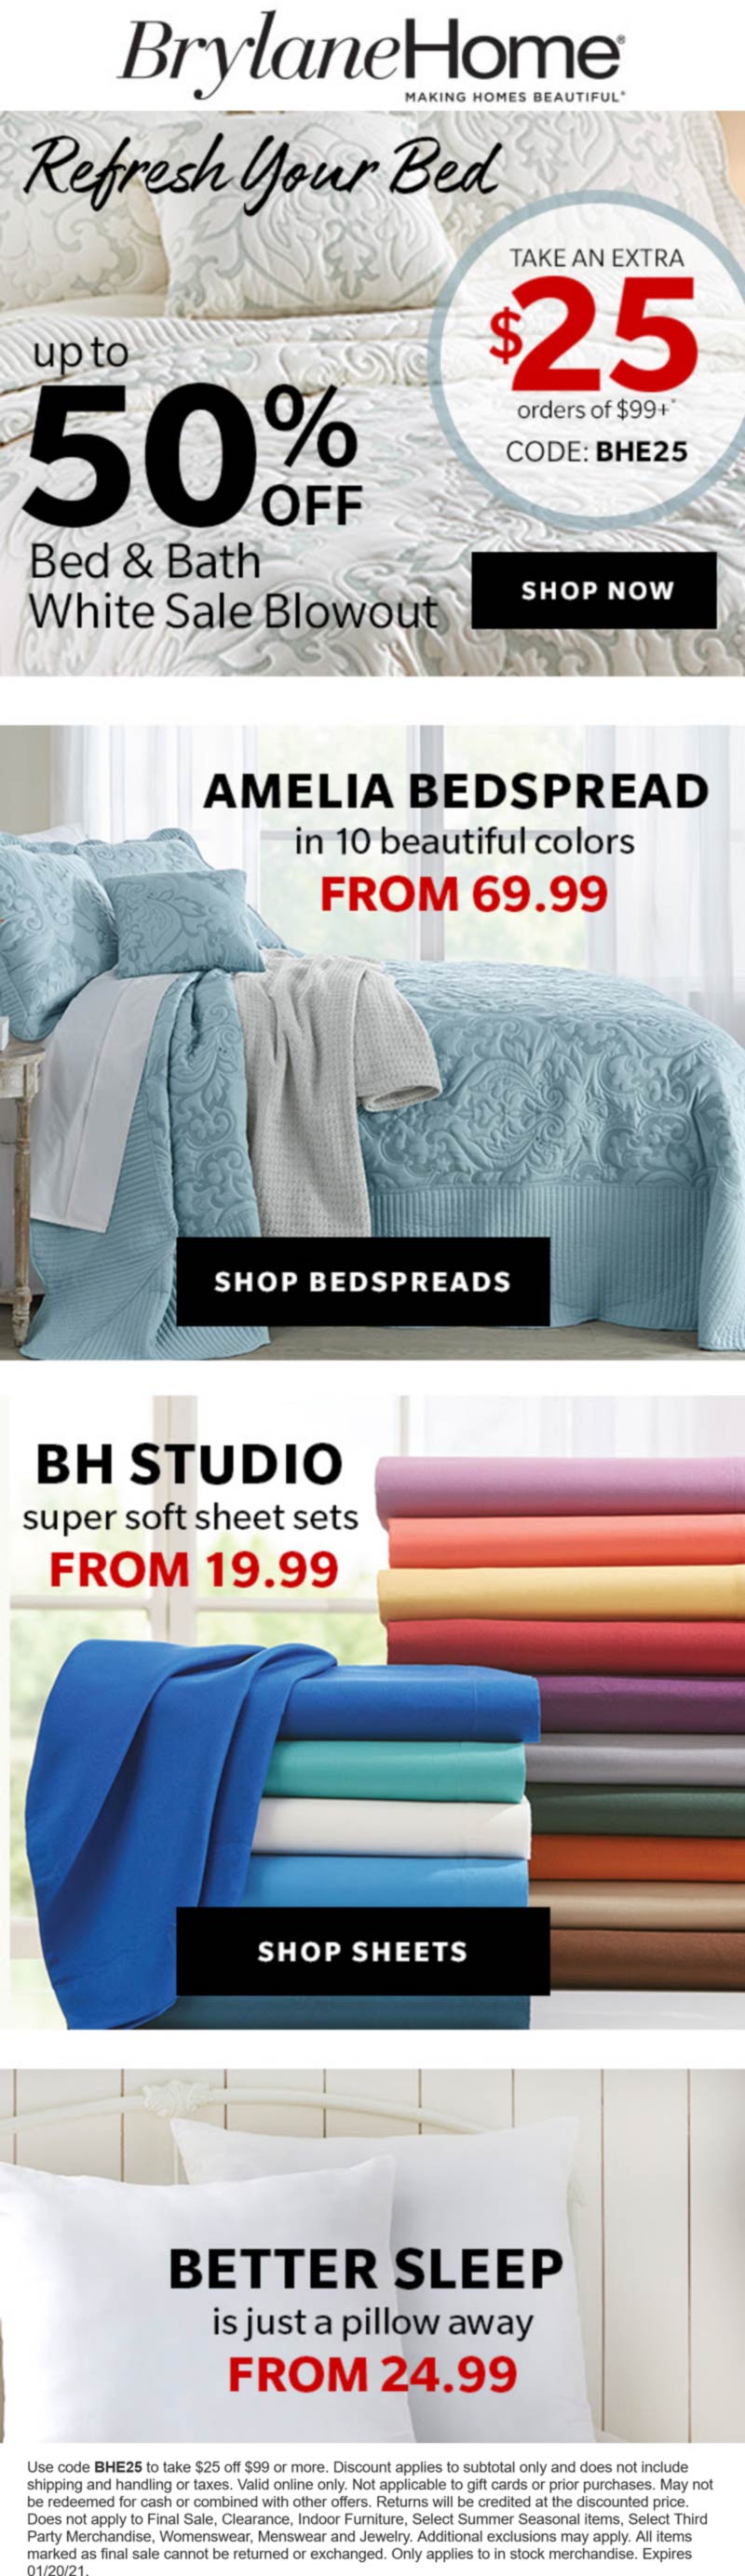 Brylane Home stores Coupon  Extra $25 off $99 at Brylane Home via promo code BHE25 #brylanehome 